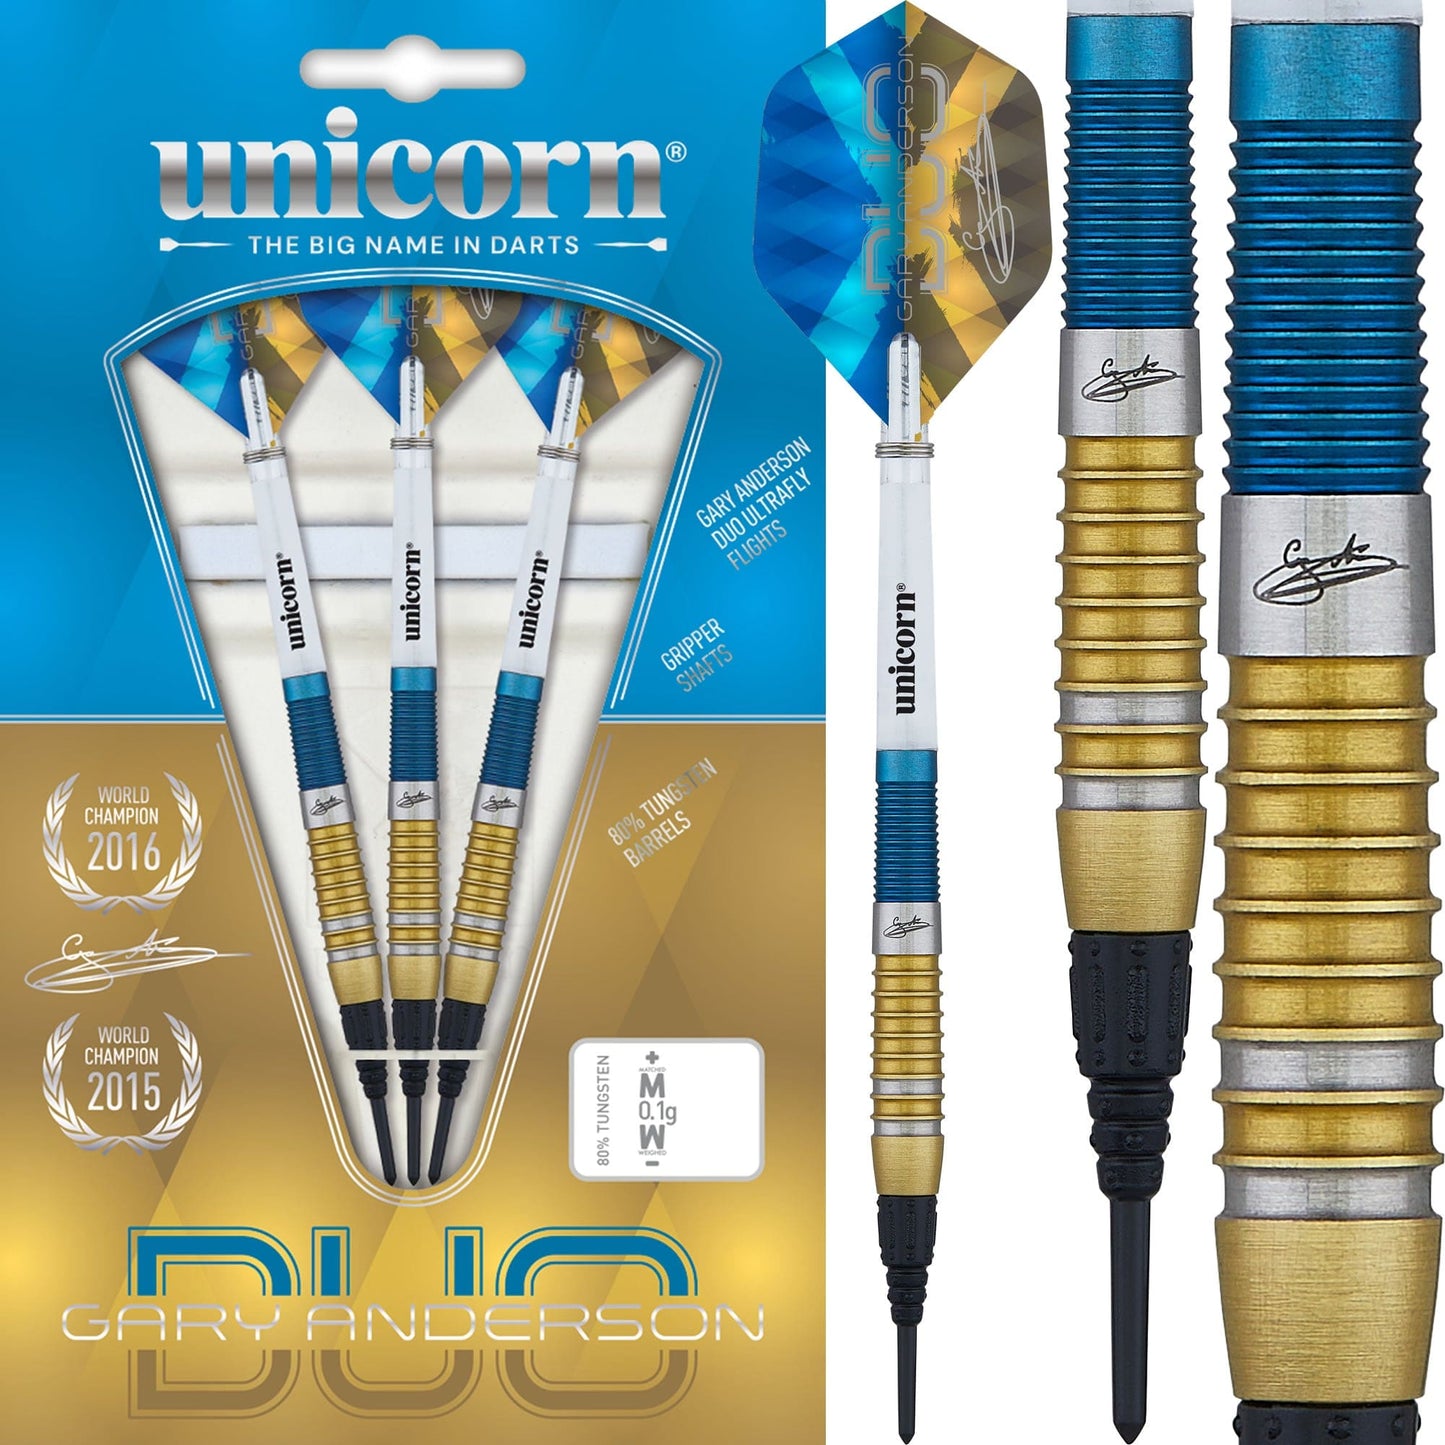 Unicorn Gary Anderson Darts - Soft Tip - The Flying Scotsman - Duo - Blue & Gold